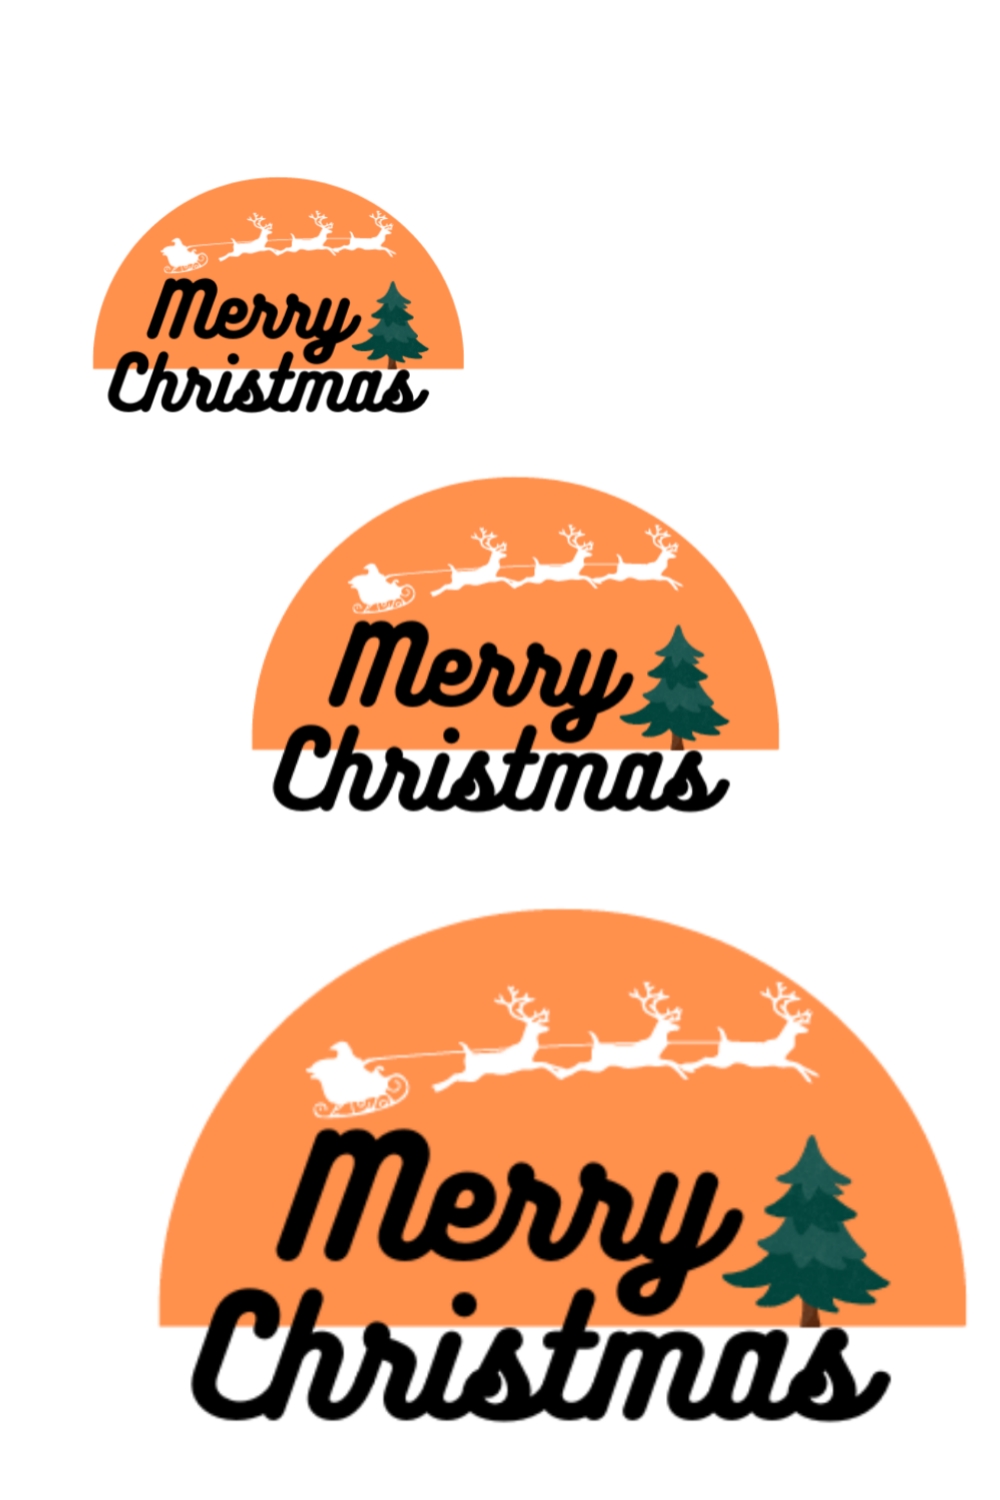 Collection of adorable images with "Merry Christmas" lettering on orange background.